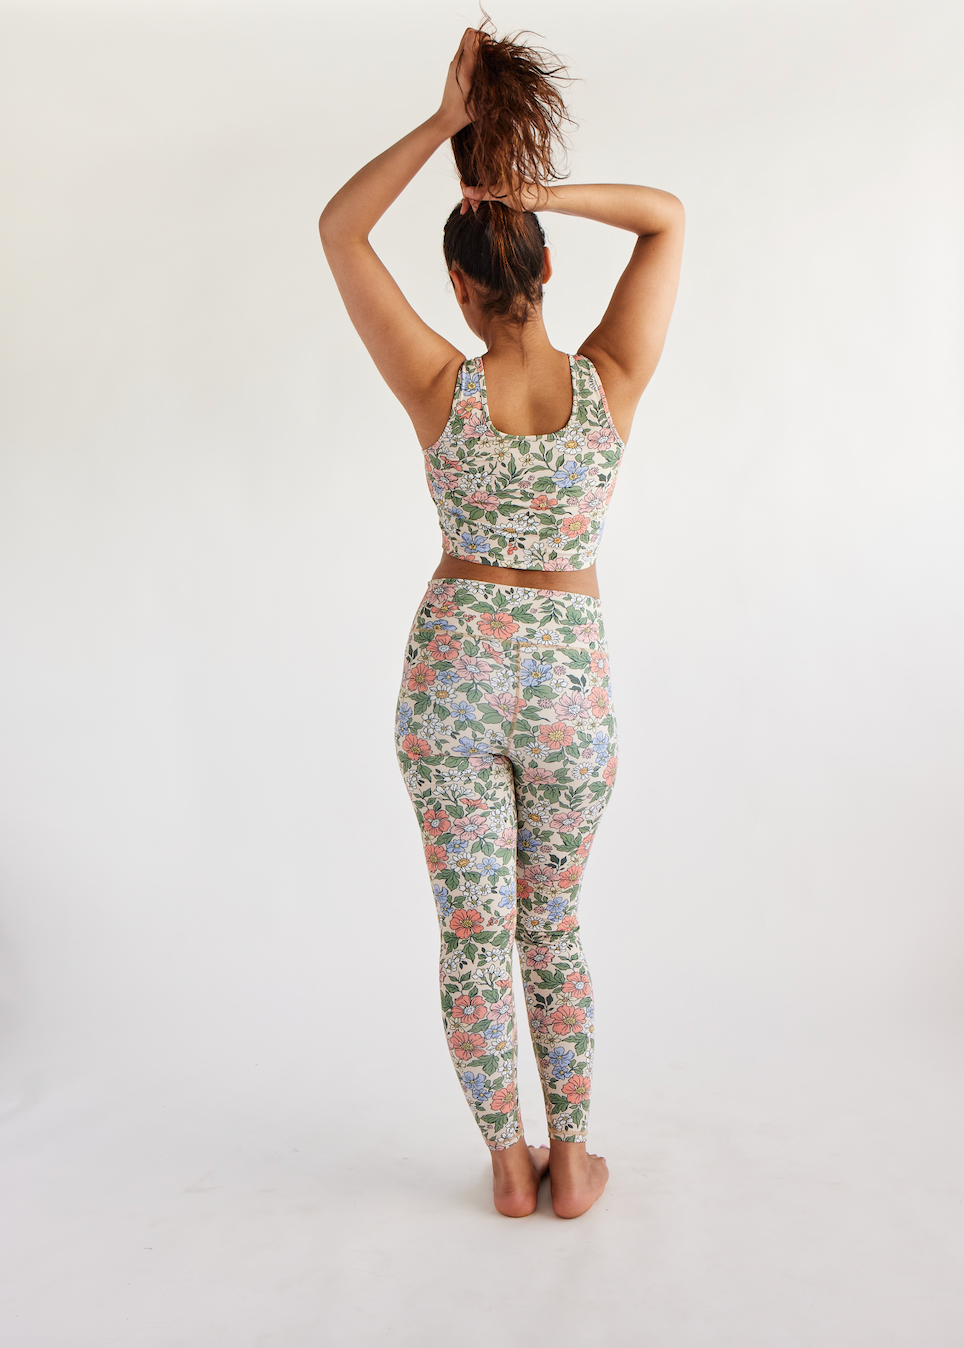 swaay, women's high waisted leggings, 82% recycled polyester, 18% spandex, floral print activewear